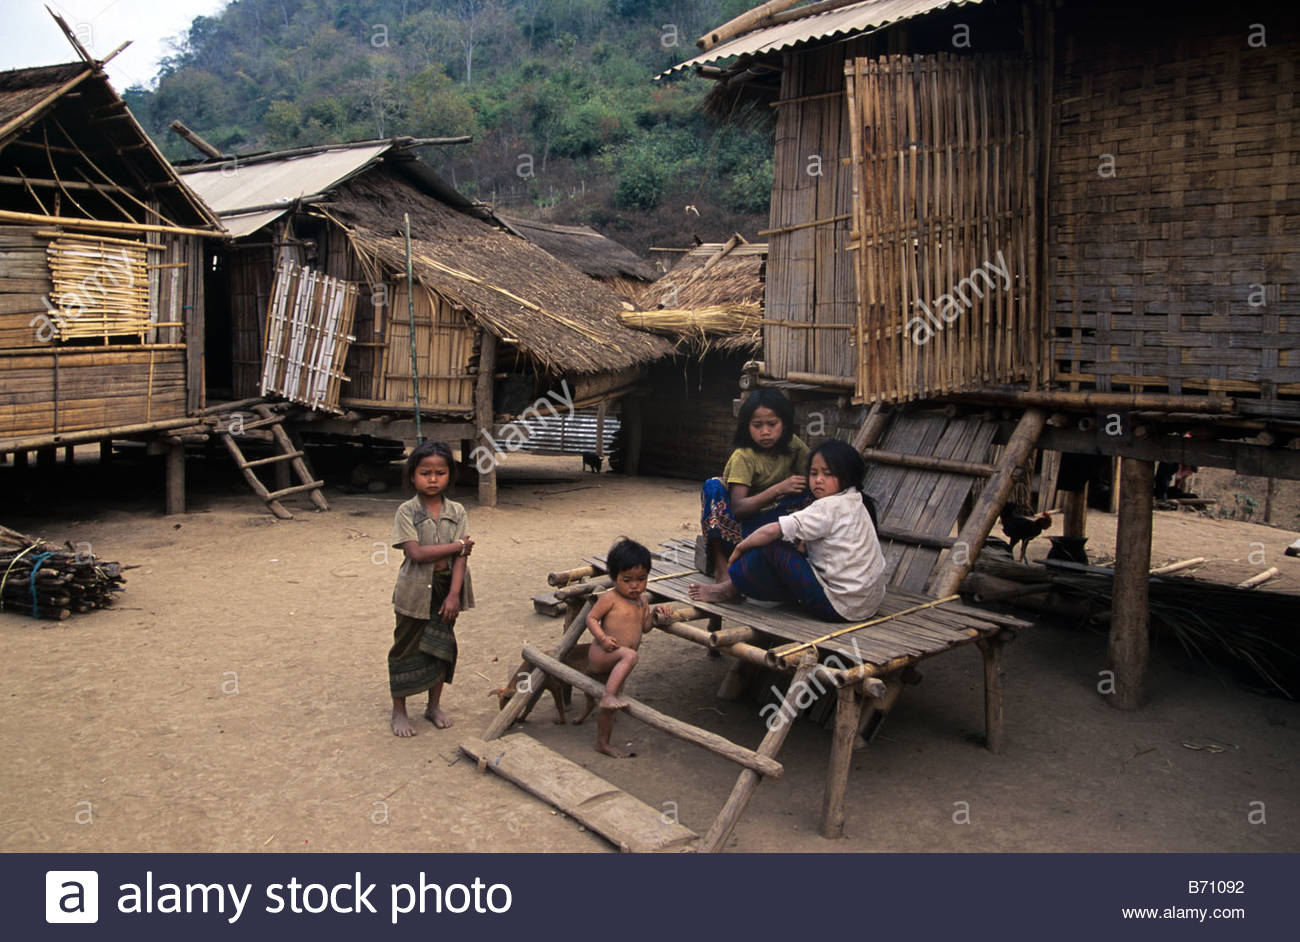 hmong-children-or-family-outside-their-traditional-bamboo-grass-houses-B71092.jpg